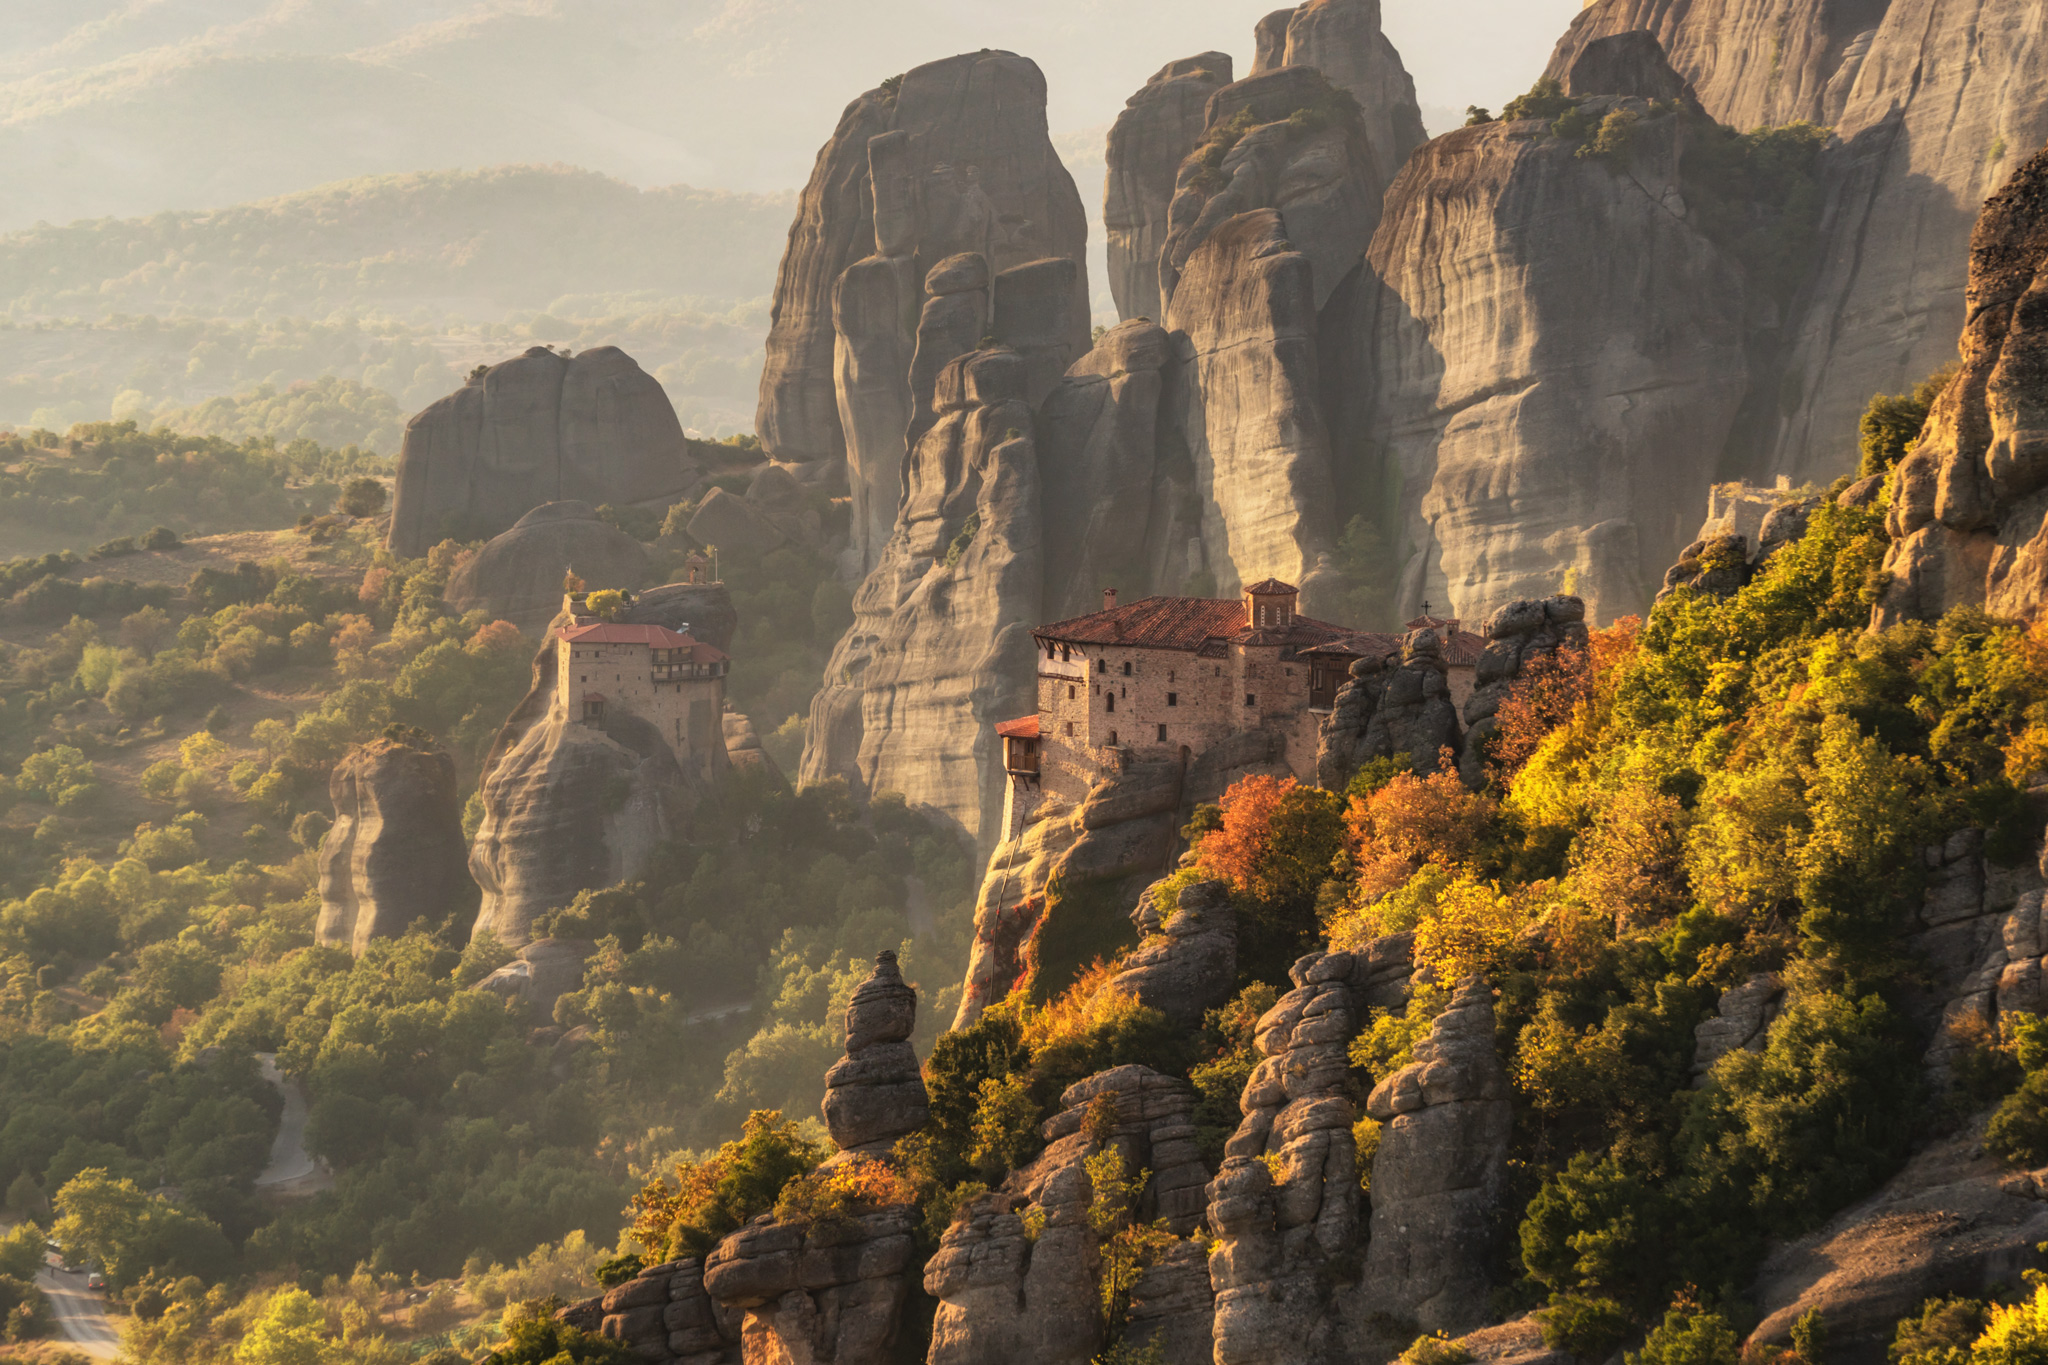 General 2048x1365 architecture forest trees nature mountains Meteora Greece